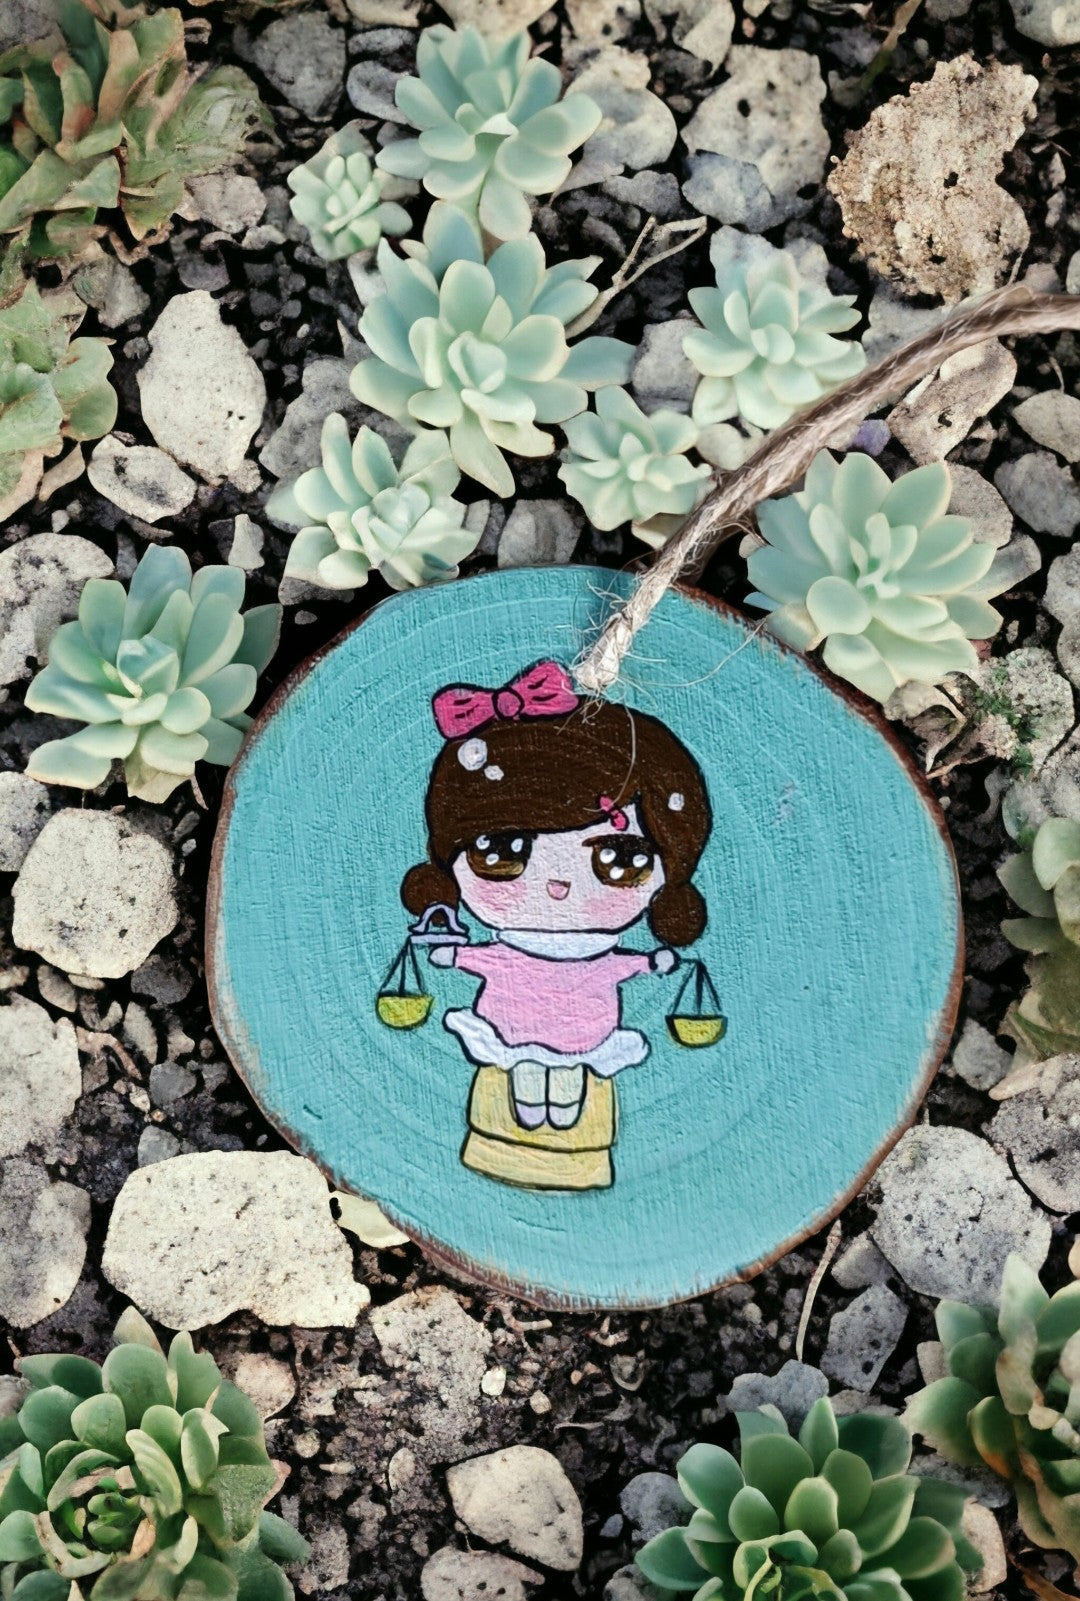 Emerald Blossoms - Hand painted Chibi Libra on Wood Slice